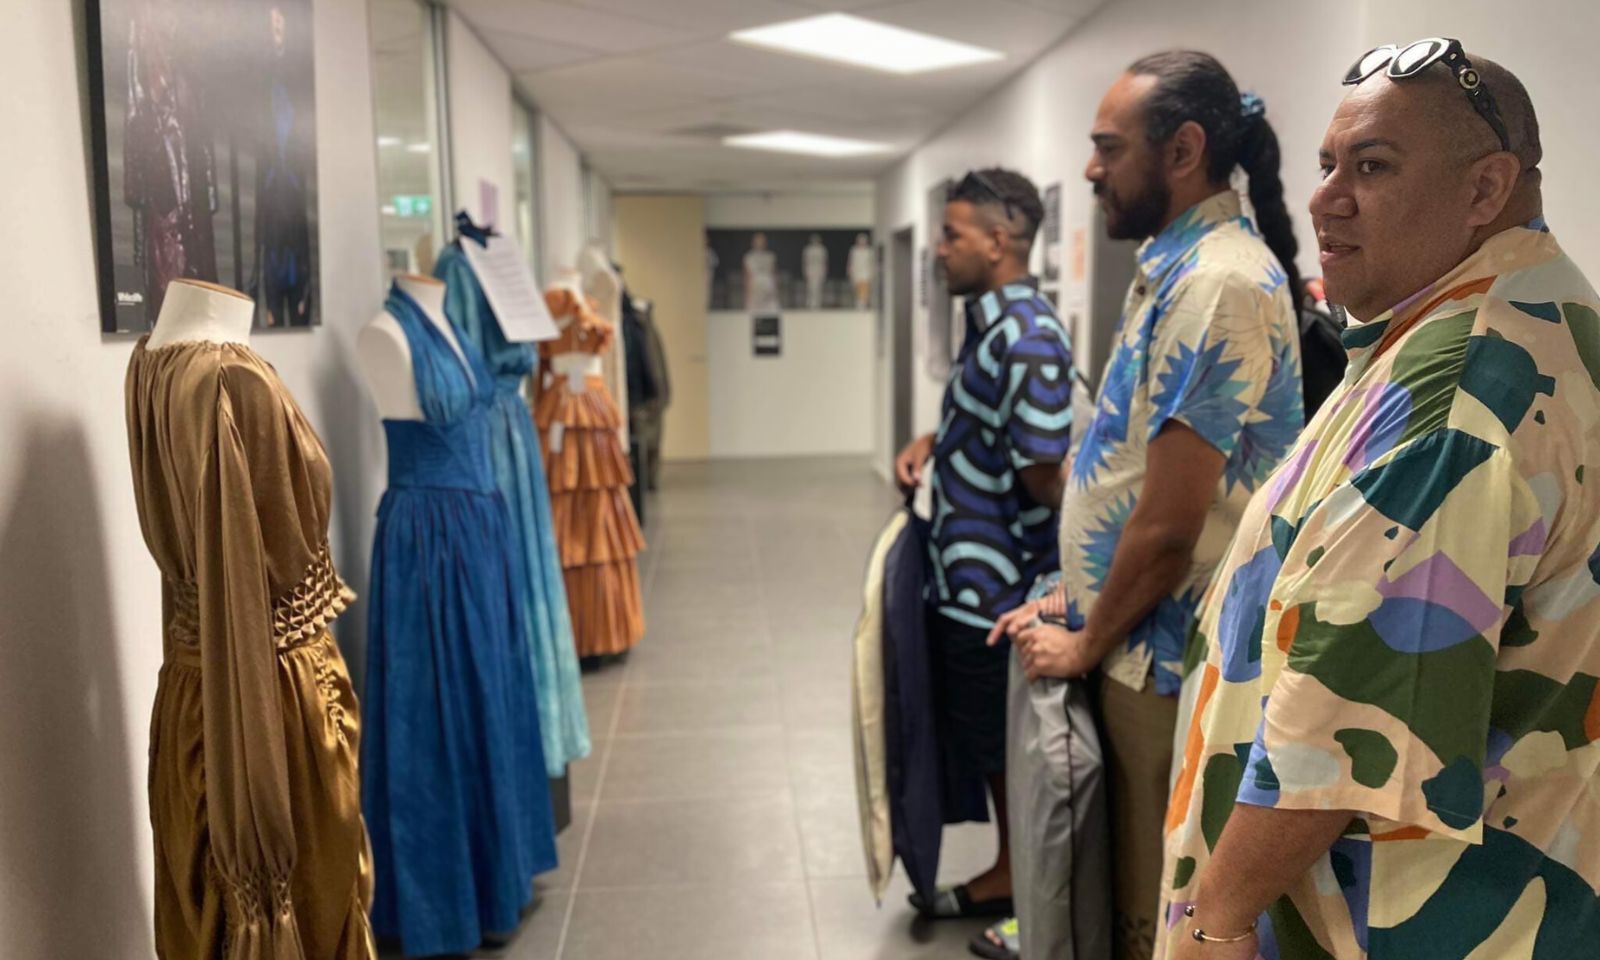 Fiji Fashion designer and co-founder of Wearing Fiji Samson Lee (foreground) with Aisea Solomone and Ledua Daurewa walking a hall of one of NZ's fashion and design schools. Photo/Pacific Connections MFAT Facebook